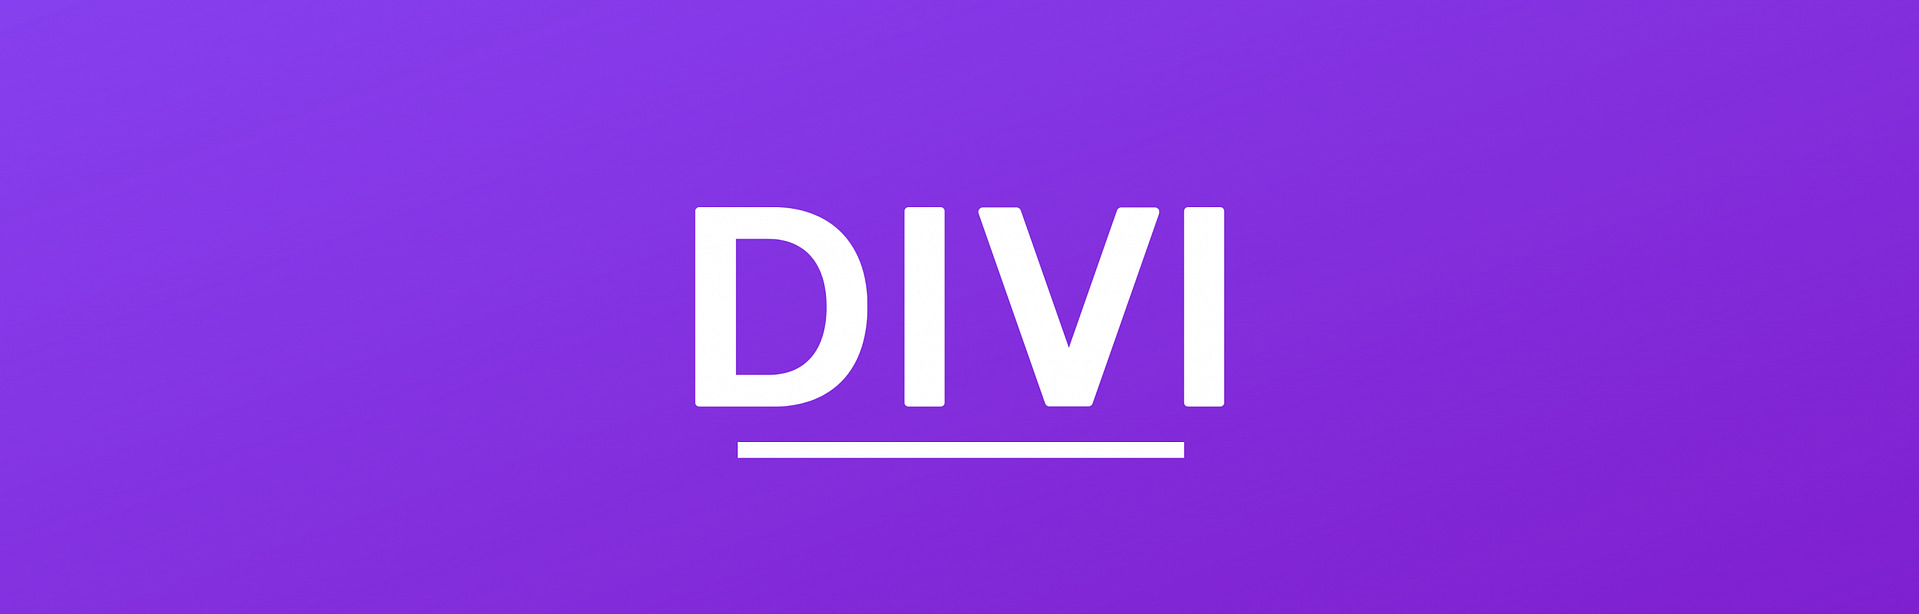 divi banner in white text and purple gradient background